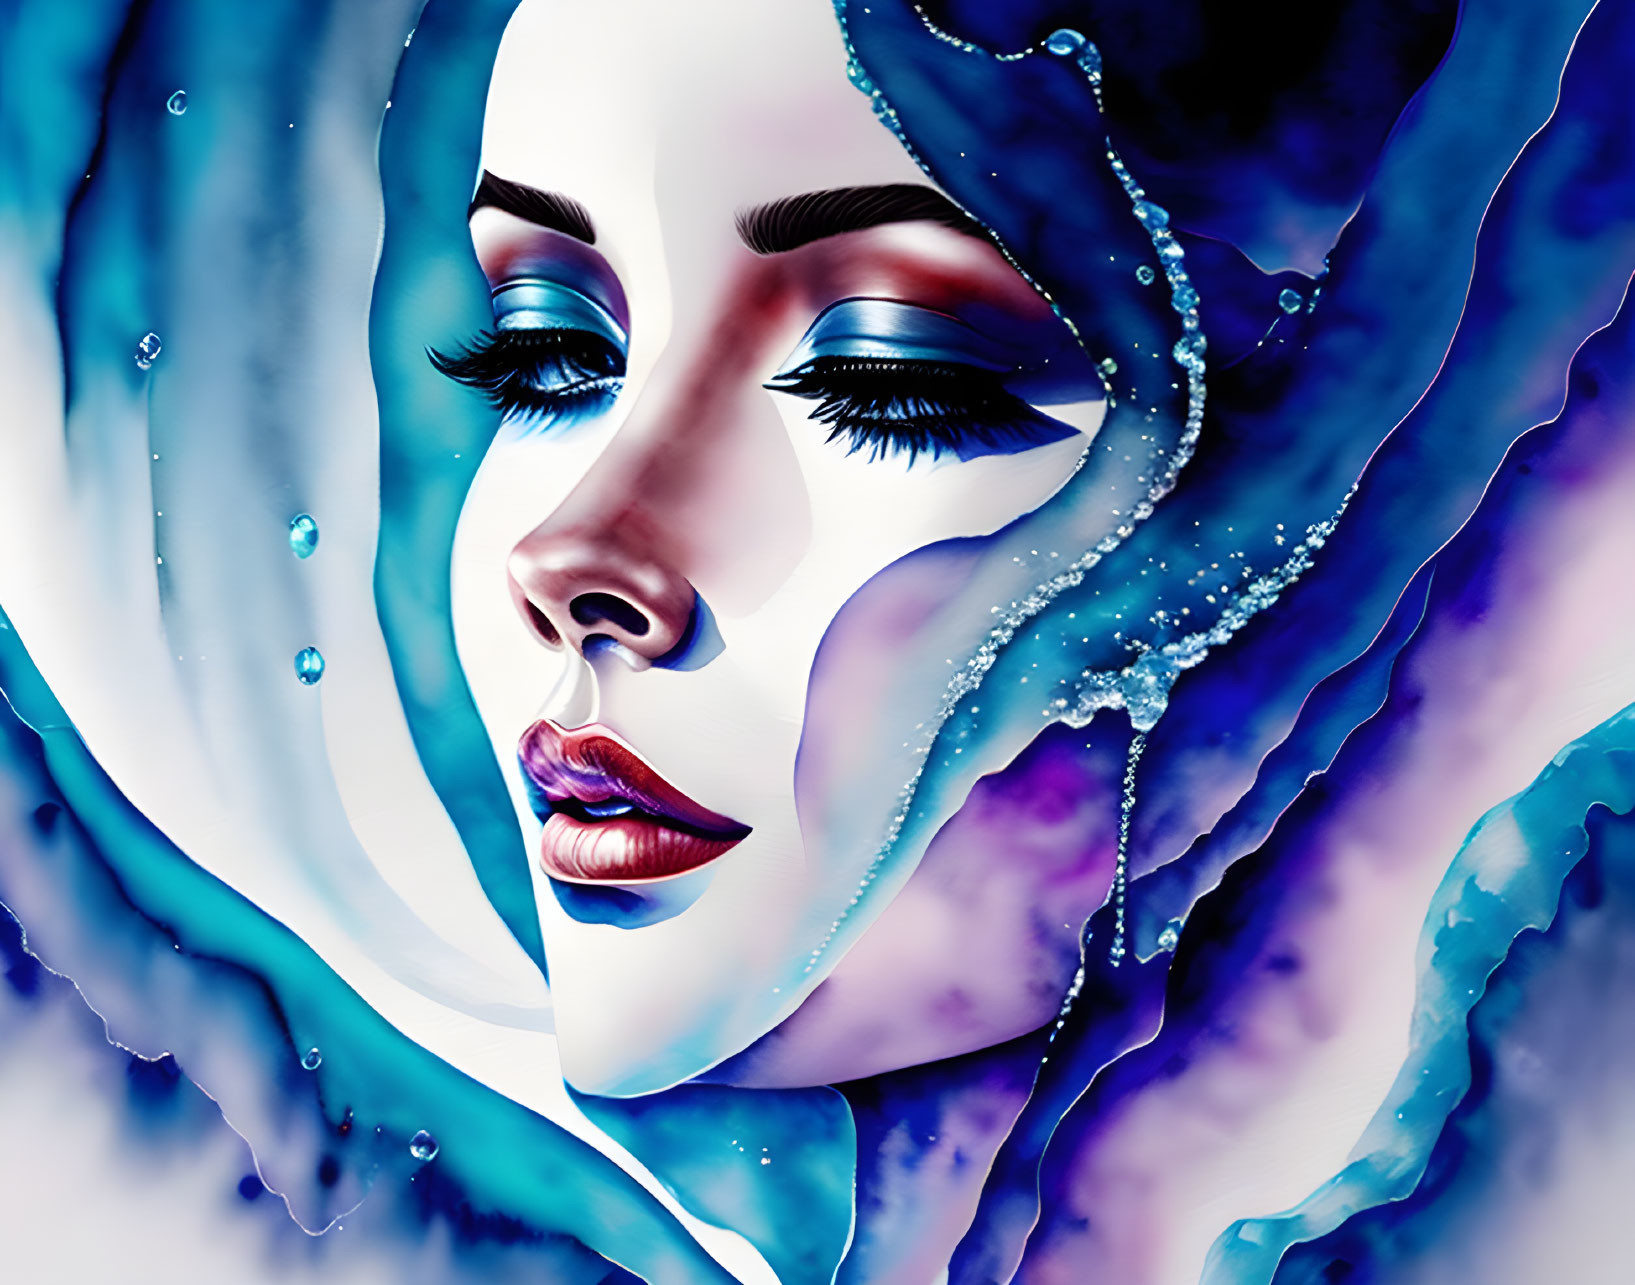 Woman's face with blue-themed makeup and abstract watery elements on galactic backdrop